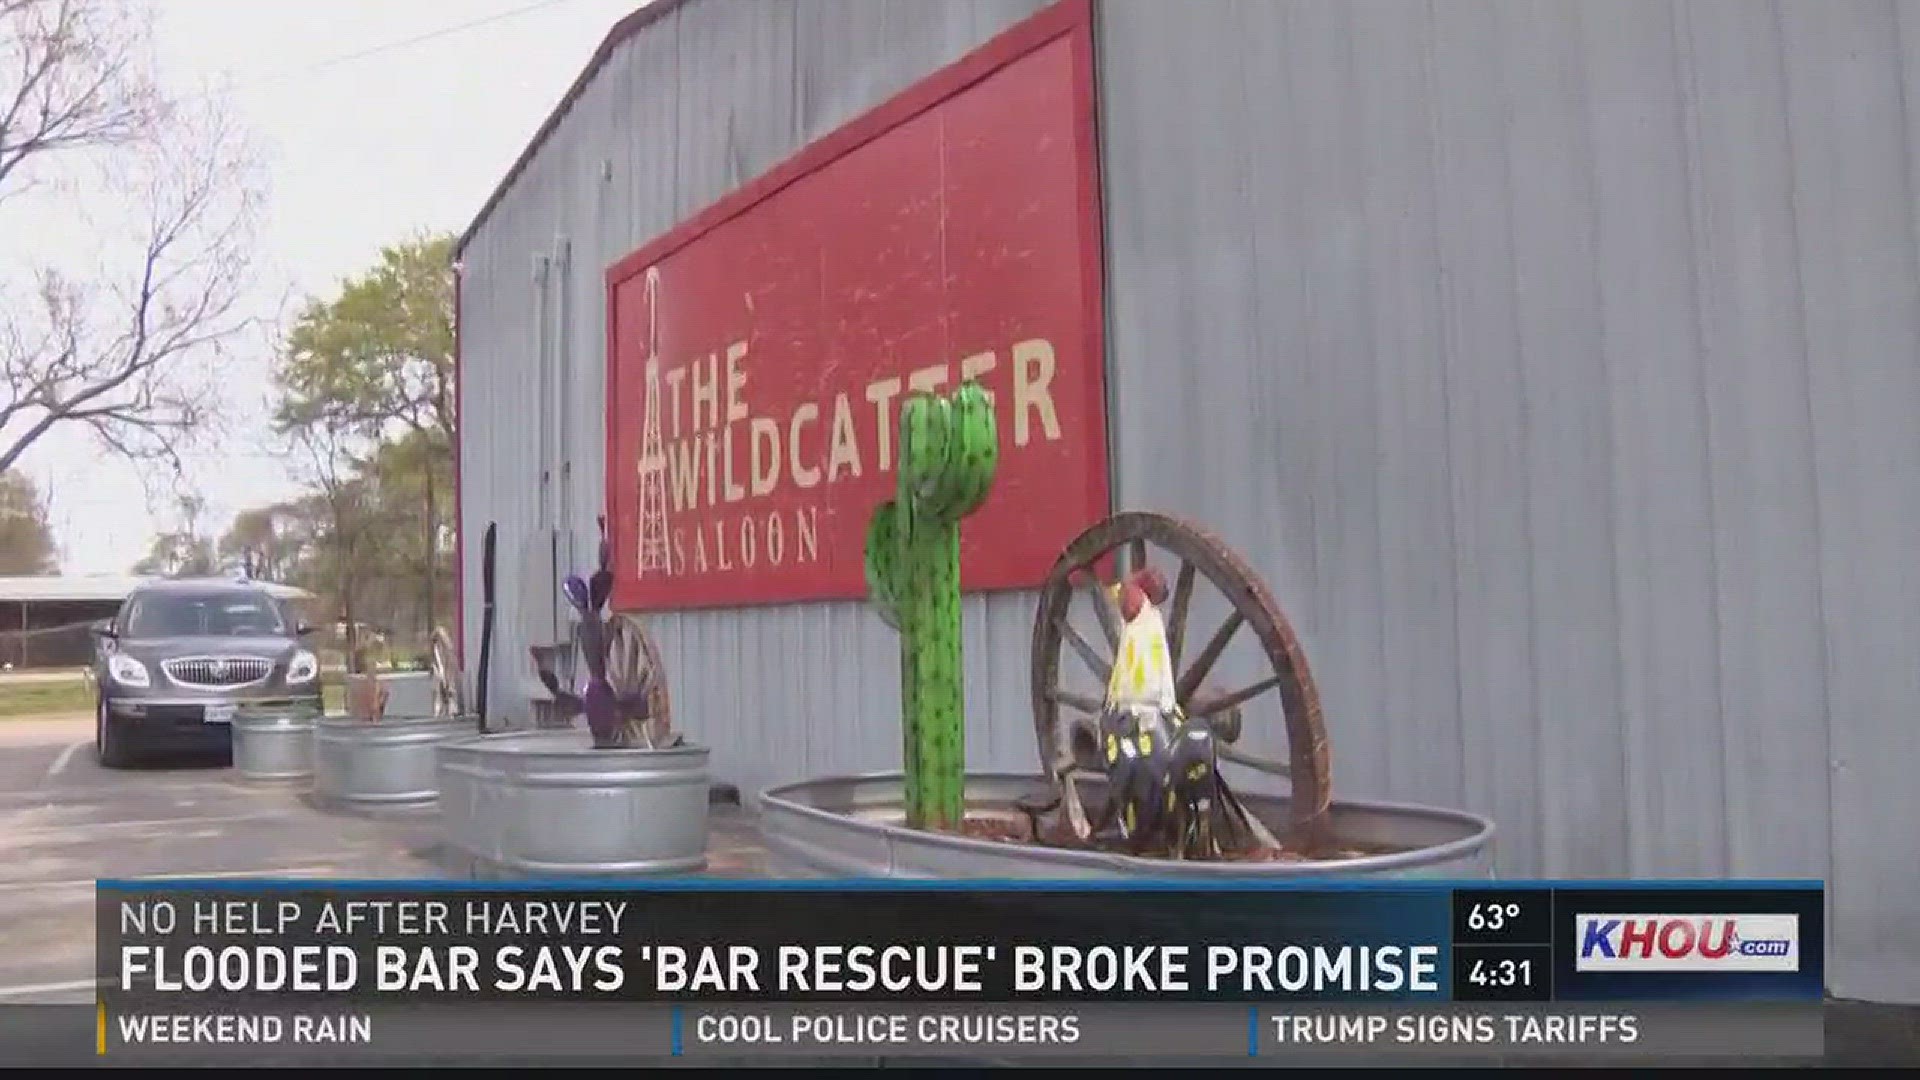 A Katy bay owner says popular make-over TV show, "Bar Rescue," promised to help him renovate his bar after Harvey but then they pulled the plug.